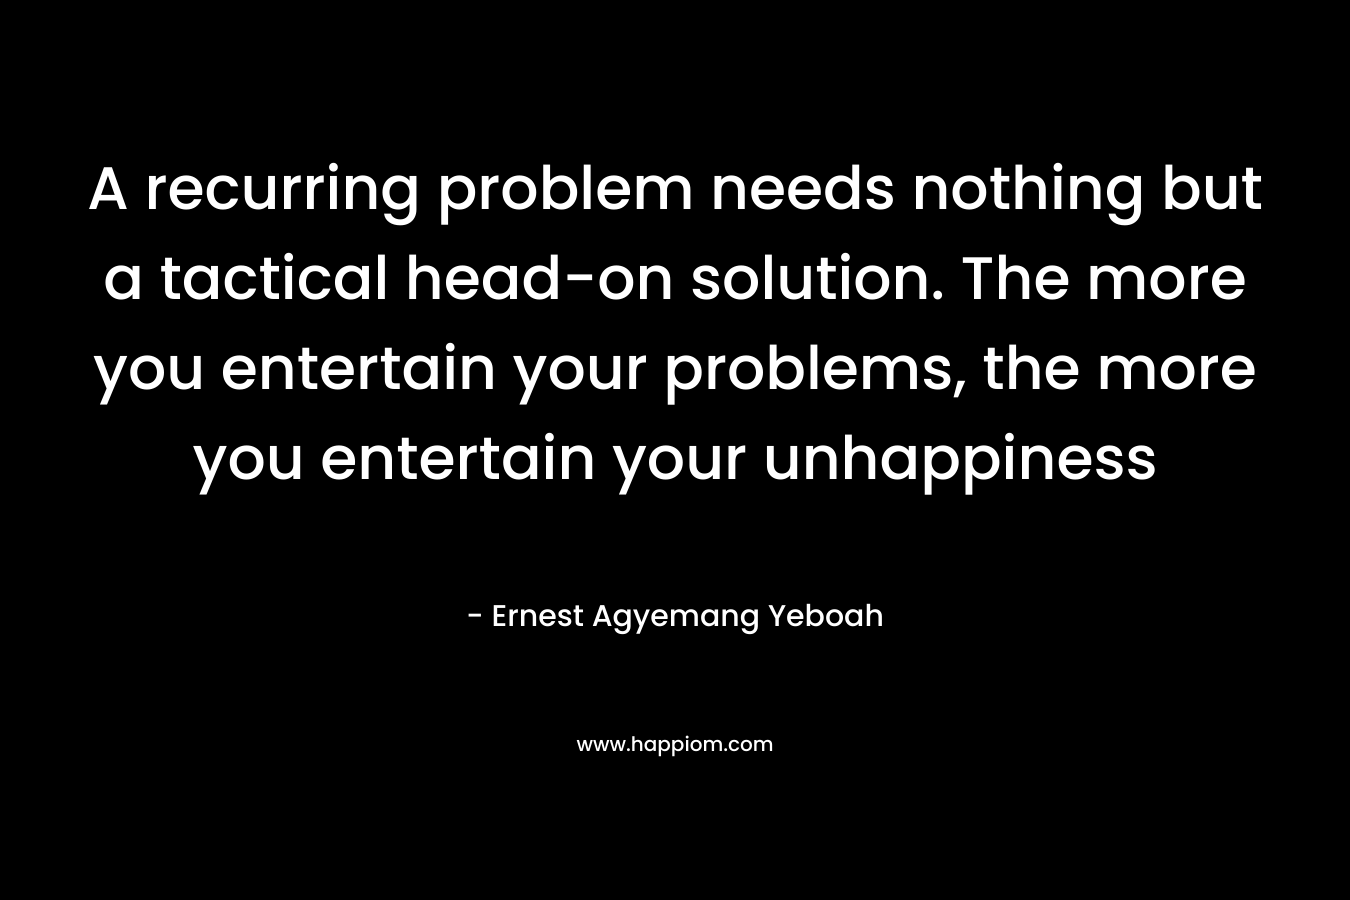 A recurring problem needs nothing but a tactical head-on solution. The more you entertain your problems, the more you entertain your unhappiness